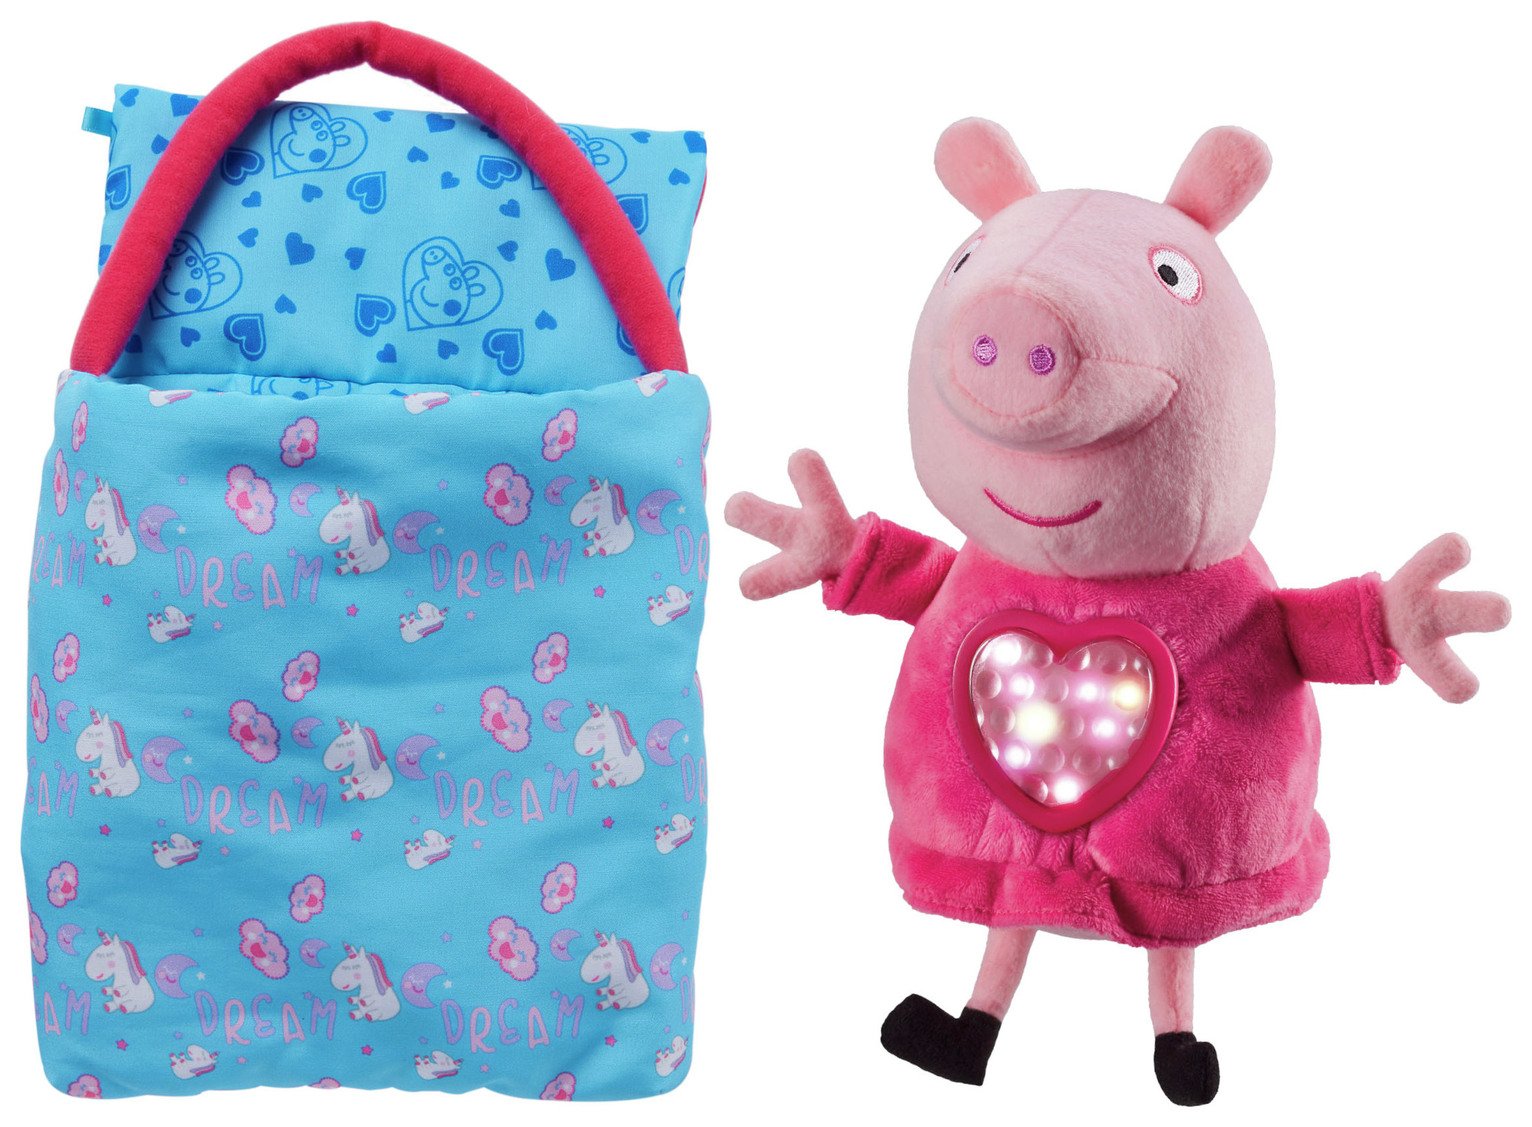 Peppa Pig Sleepover Cuddly Toy Plush review